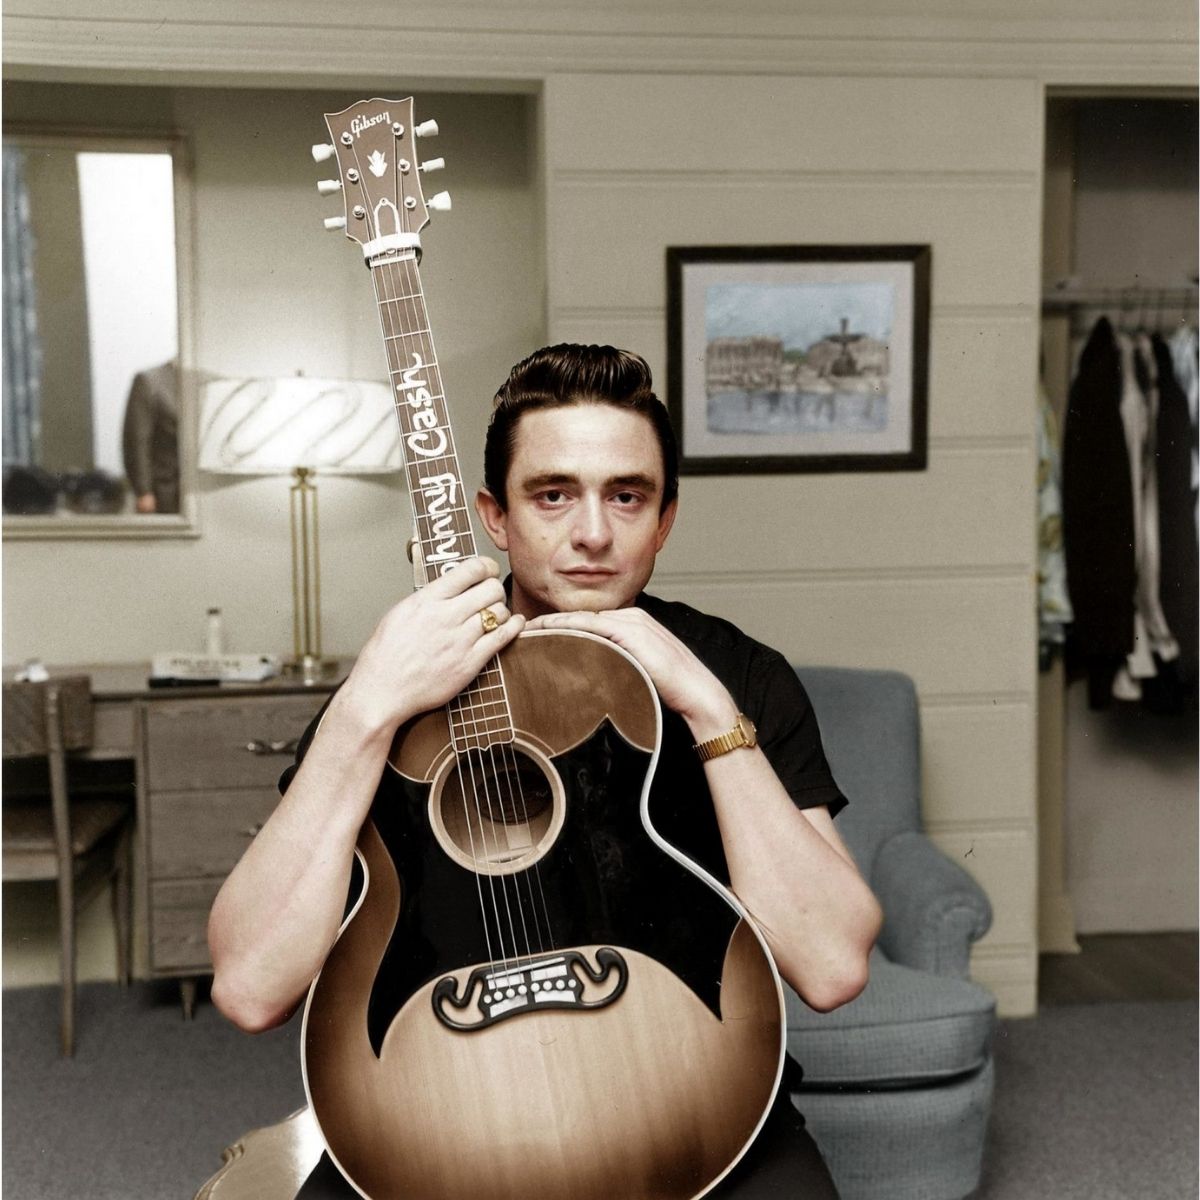 Johnny Cash at a young age